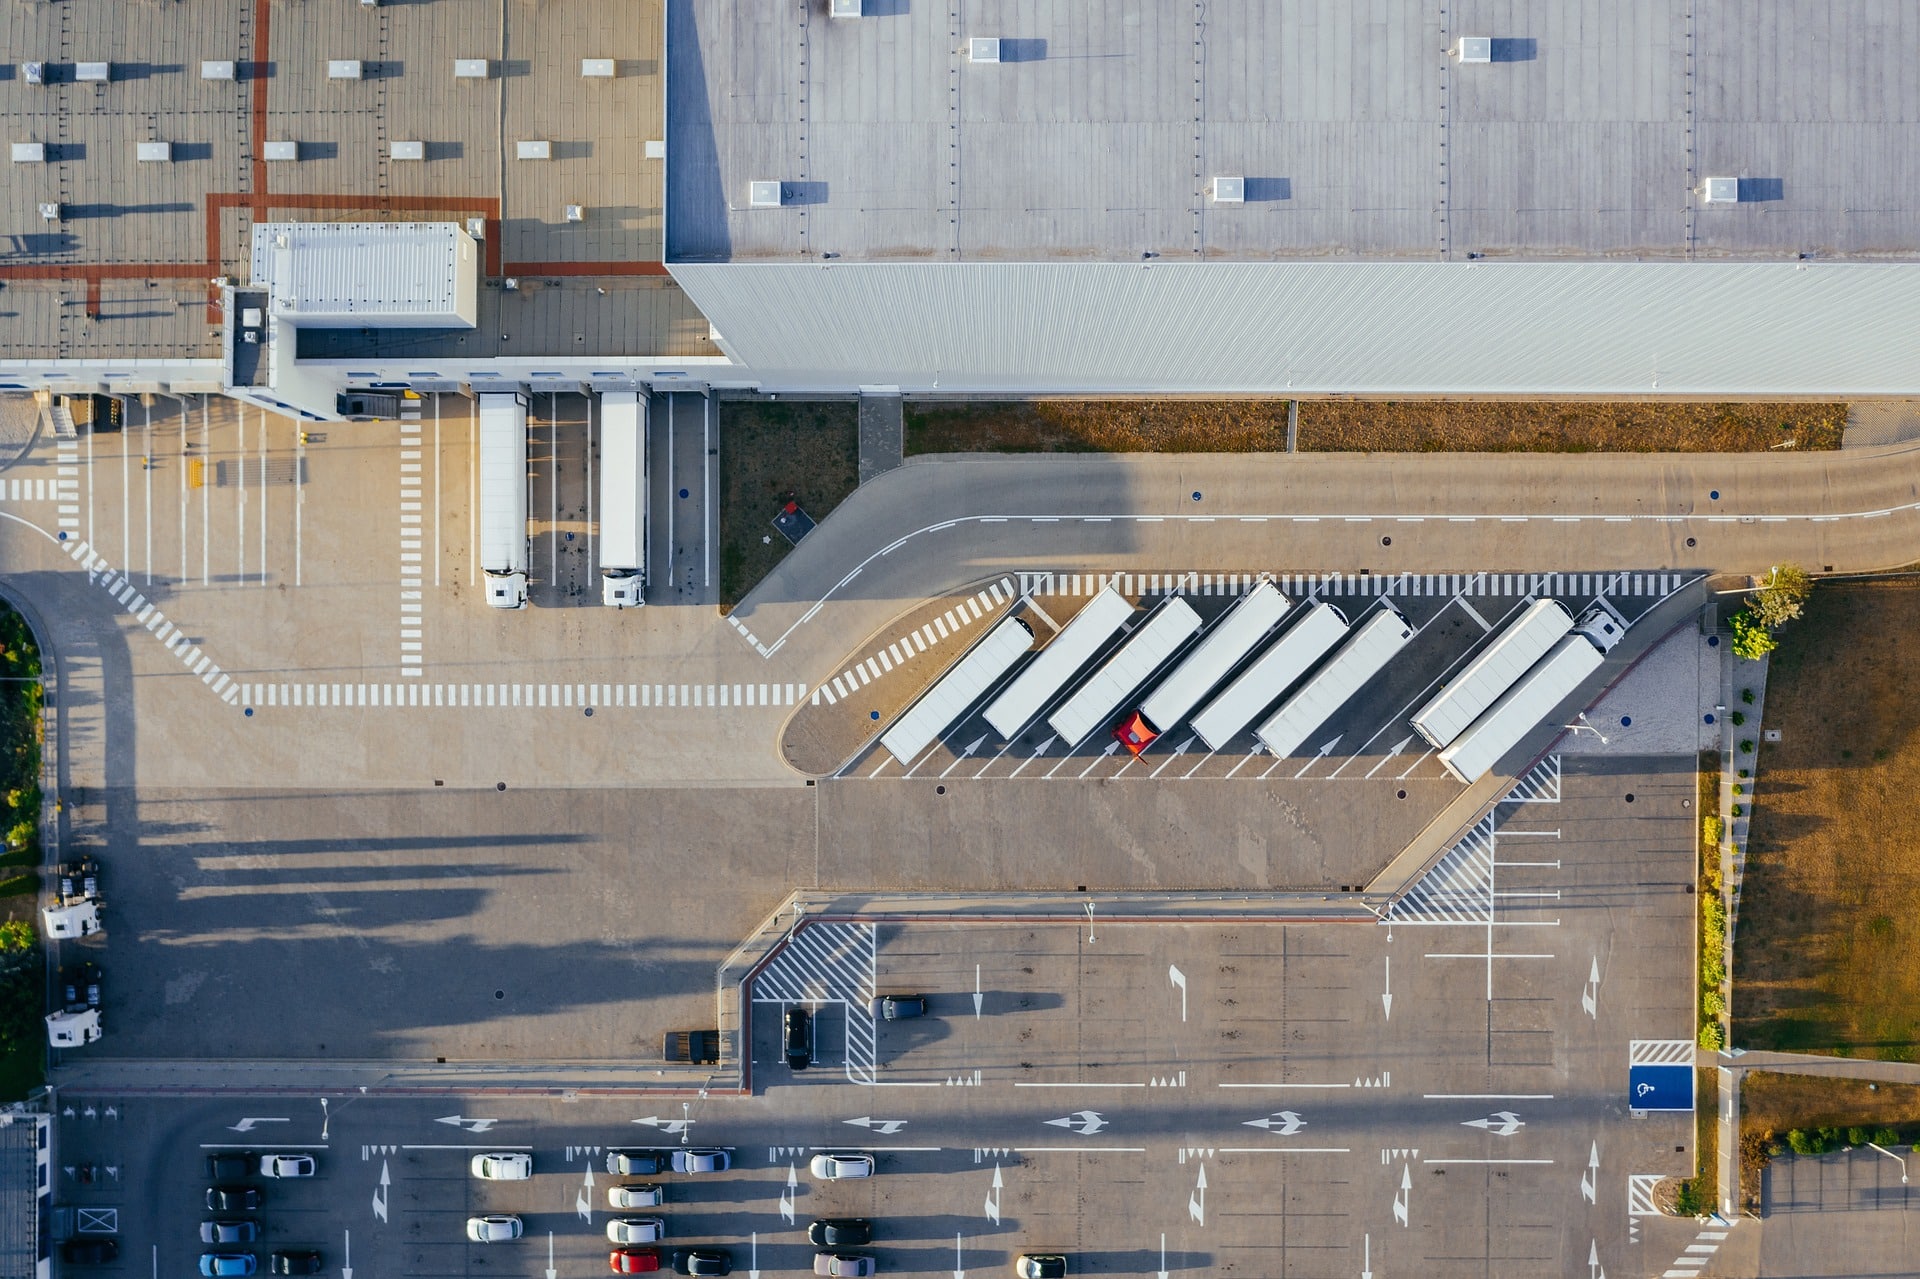 Top view of distribution warehouse with semi trucks